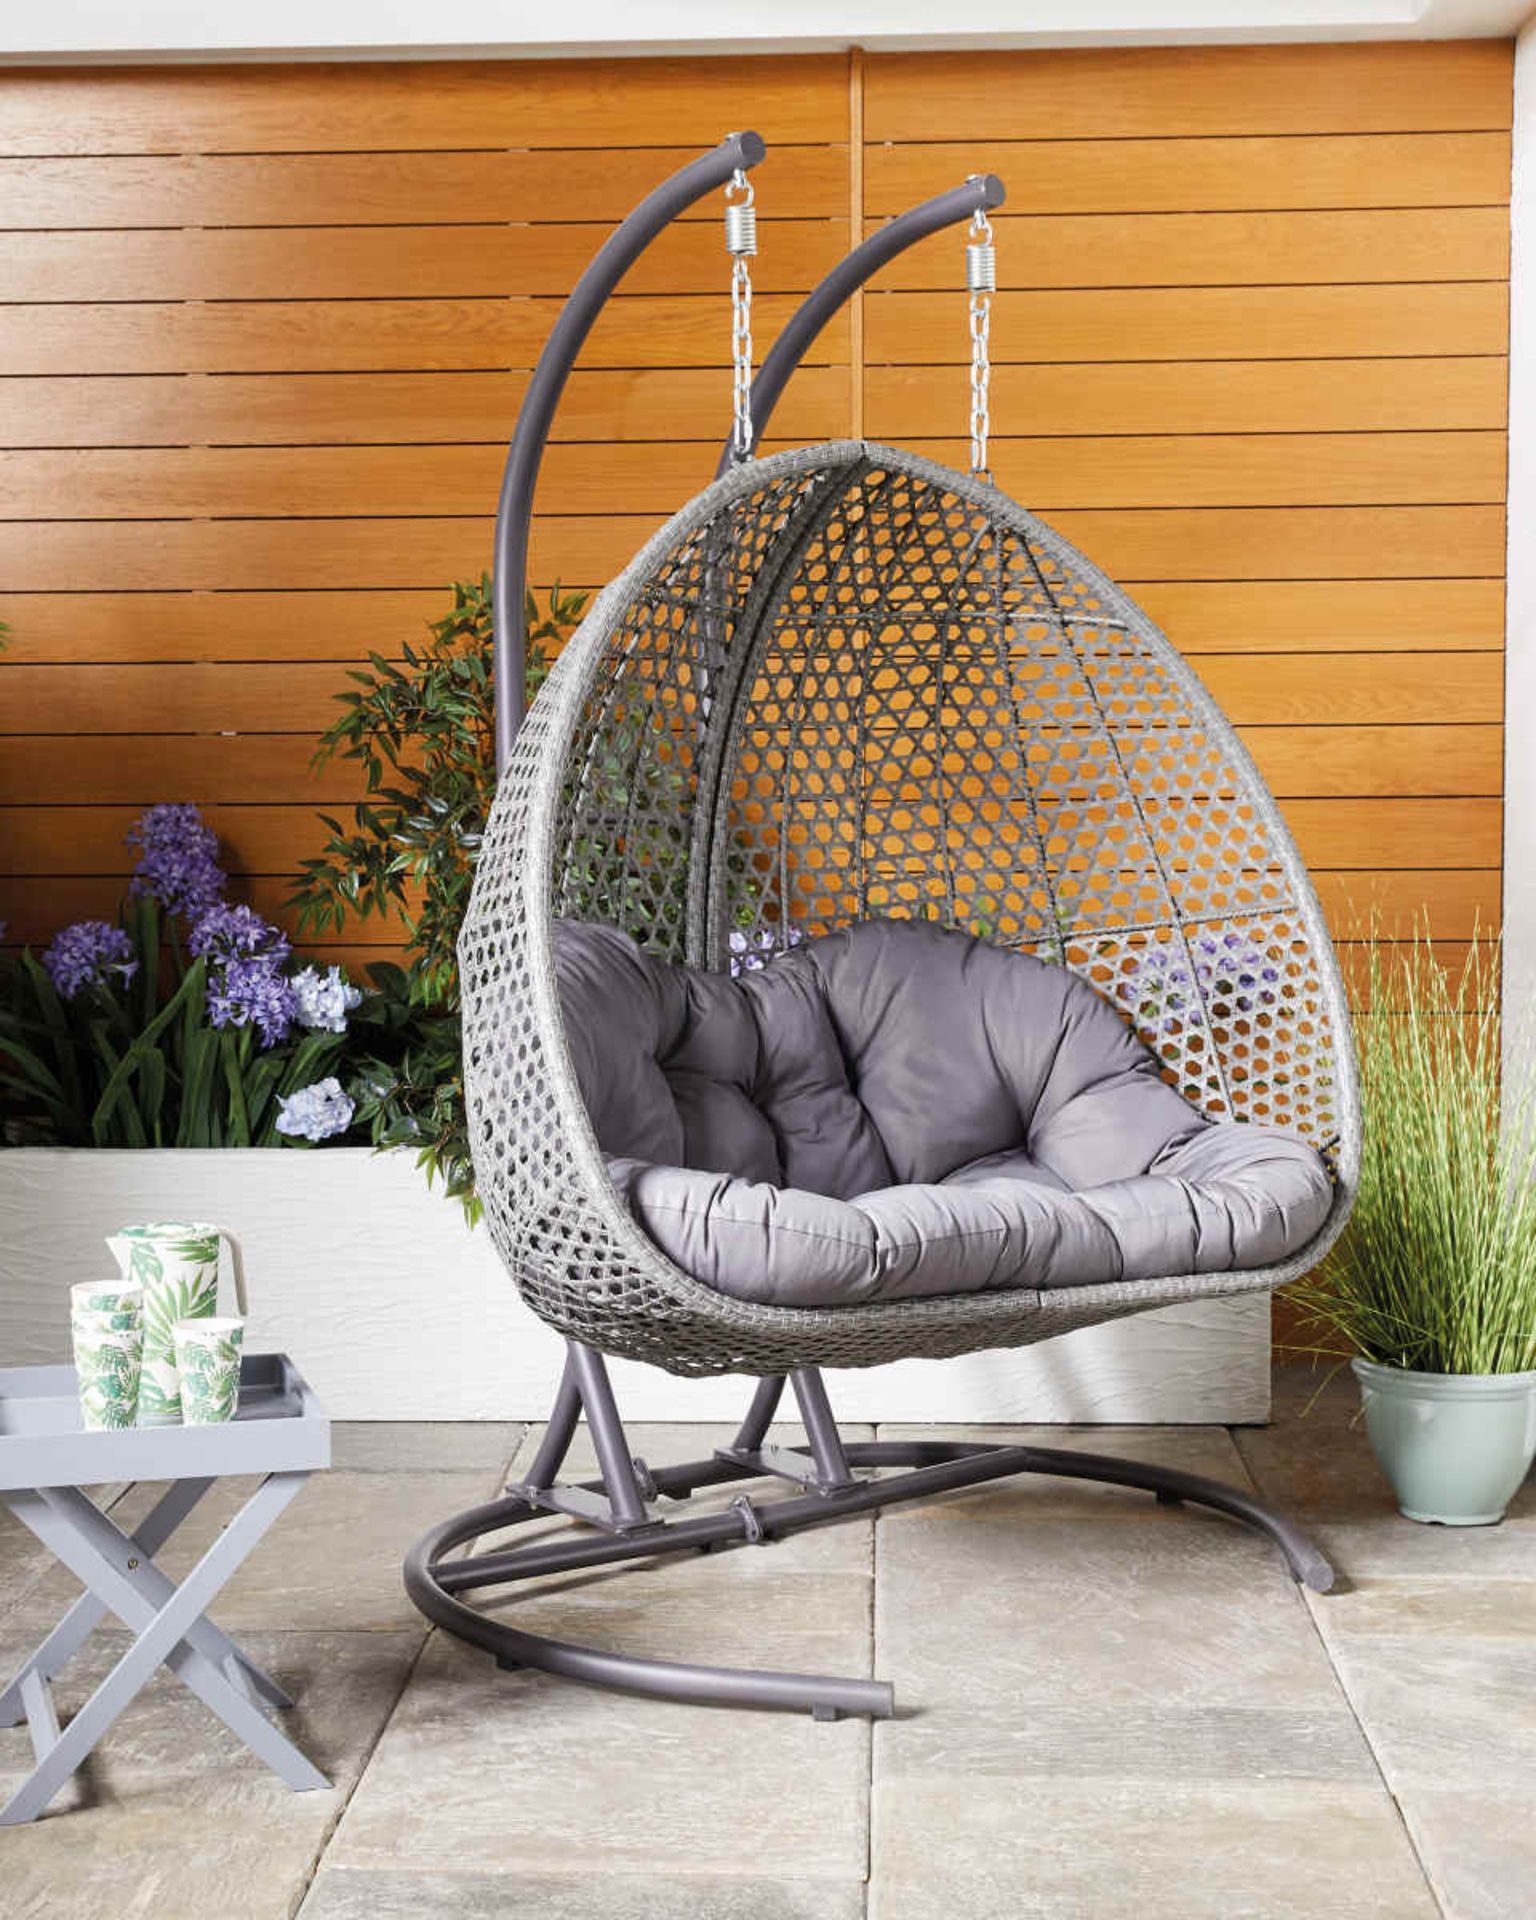 Large Hanging Egg Chair. - H/ST. This amazing Large Hanging Egg Chair is the ideal way to relax in - Image 3 of 3